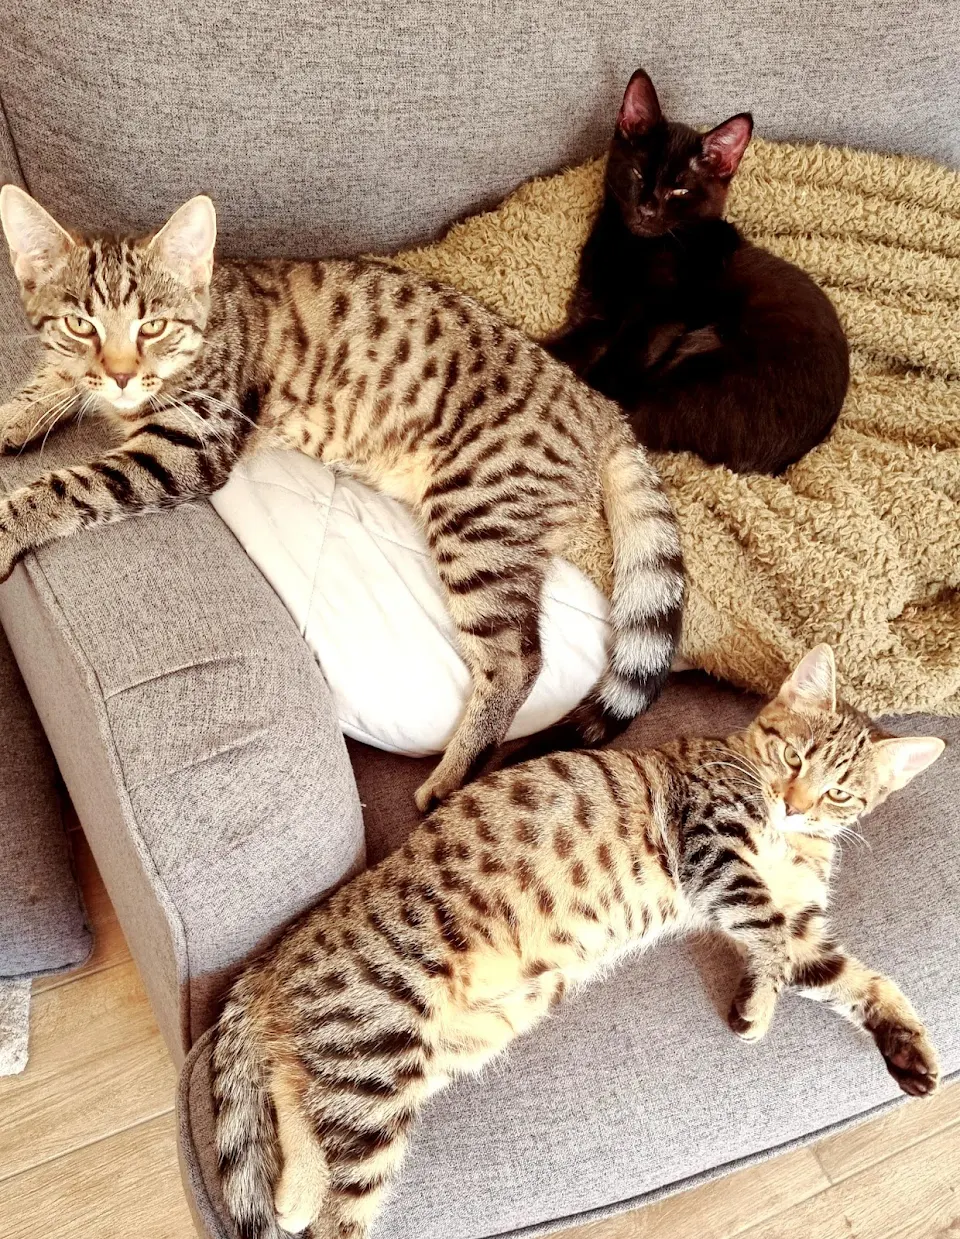 Two Bengals and a little blank sphynx cross loving life this afternoon.